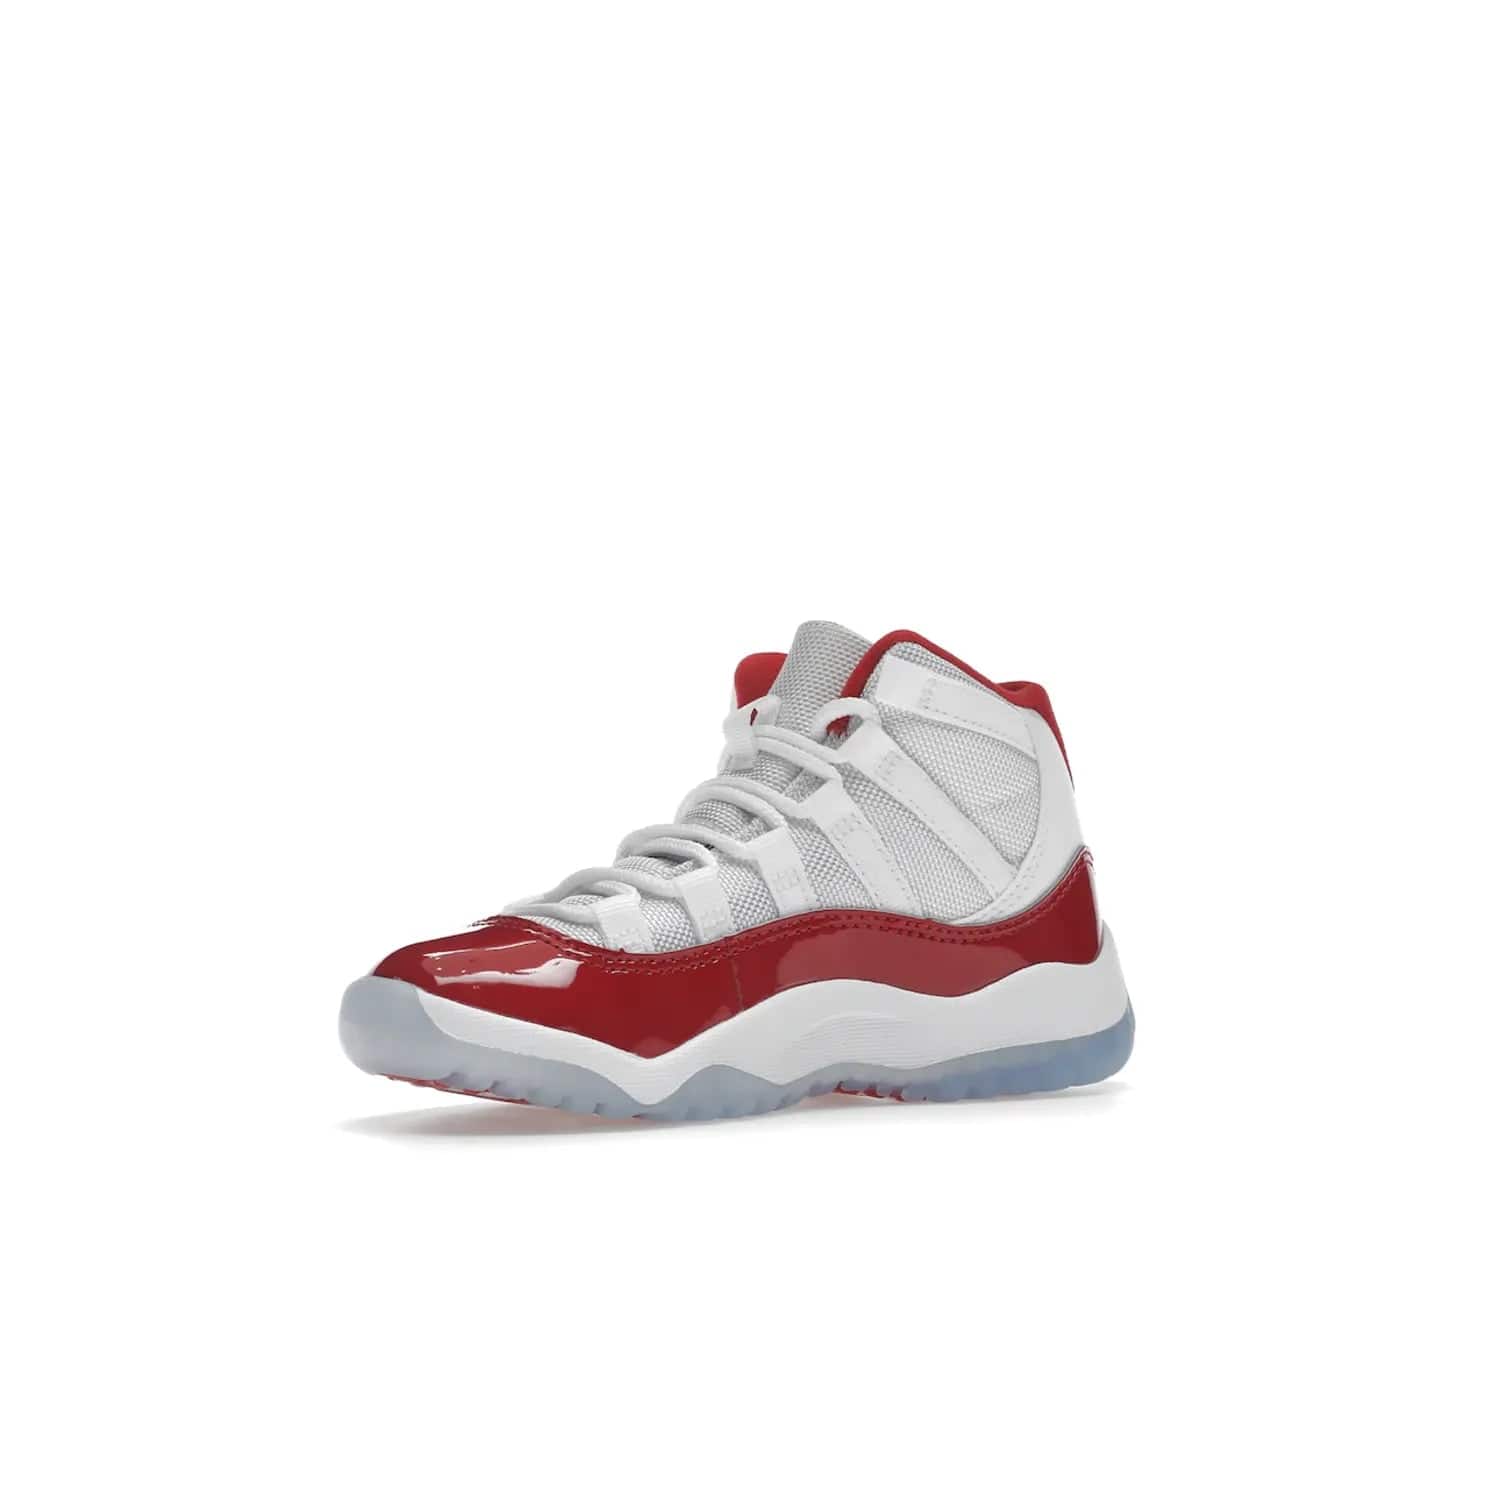 Jordan 11 Retro Cherry (2022) (PS) - Image 16 - Only at www.BallersClubKickz.com - An iconic silhouette with a timeless look, the Air Jordan 11 Retro Cherry 2022 PS features a crisp White, Varsity Red and Black colorway. The upper is made of ballistic mesh, a red patent leather mudguard, '23' branding and white Phylon midsole. Get optimal cushioning and comfort on December 10th, 2022. Don't miss out.